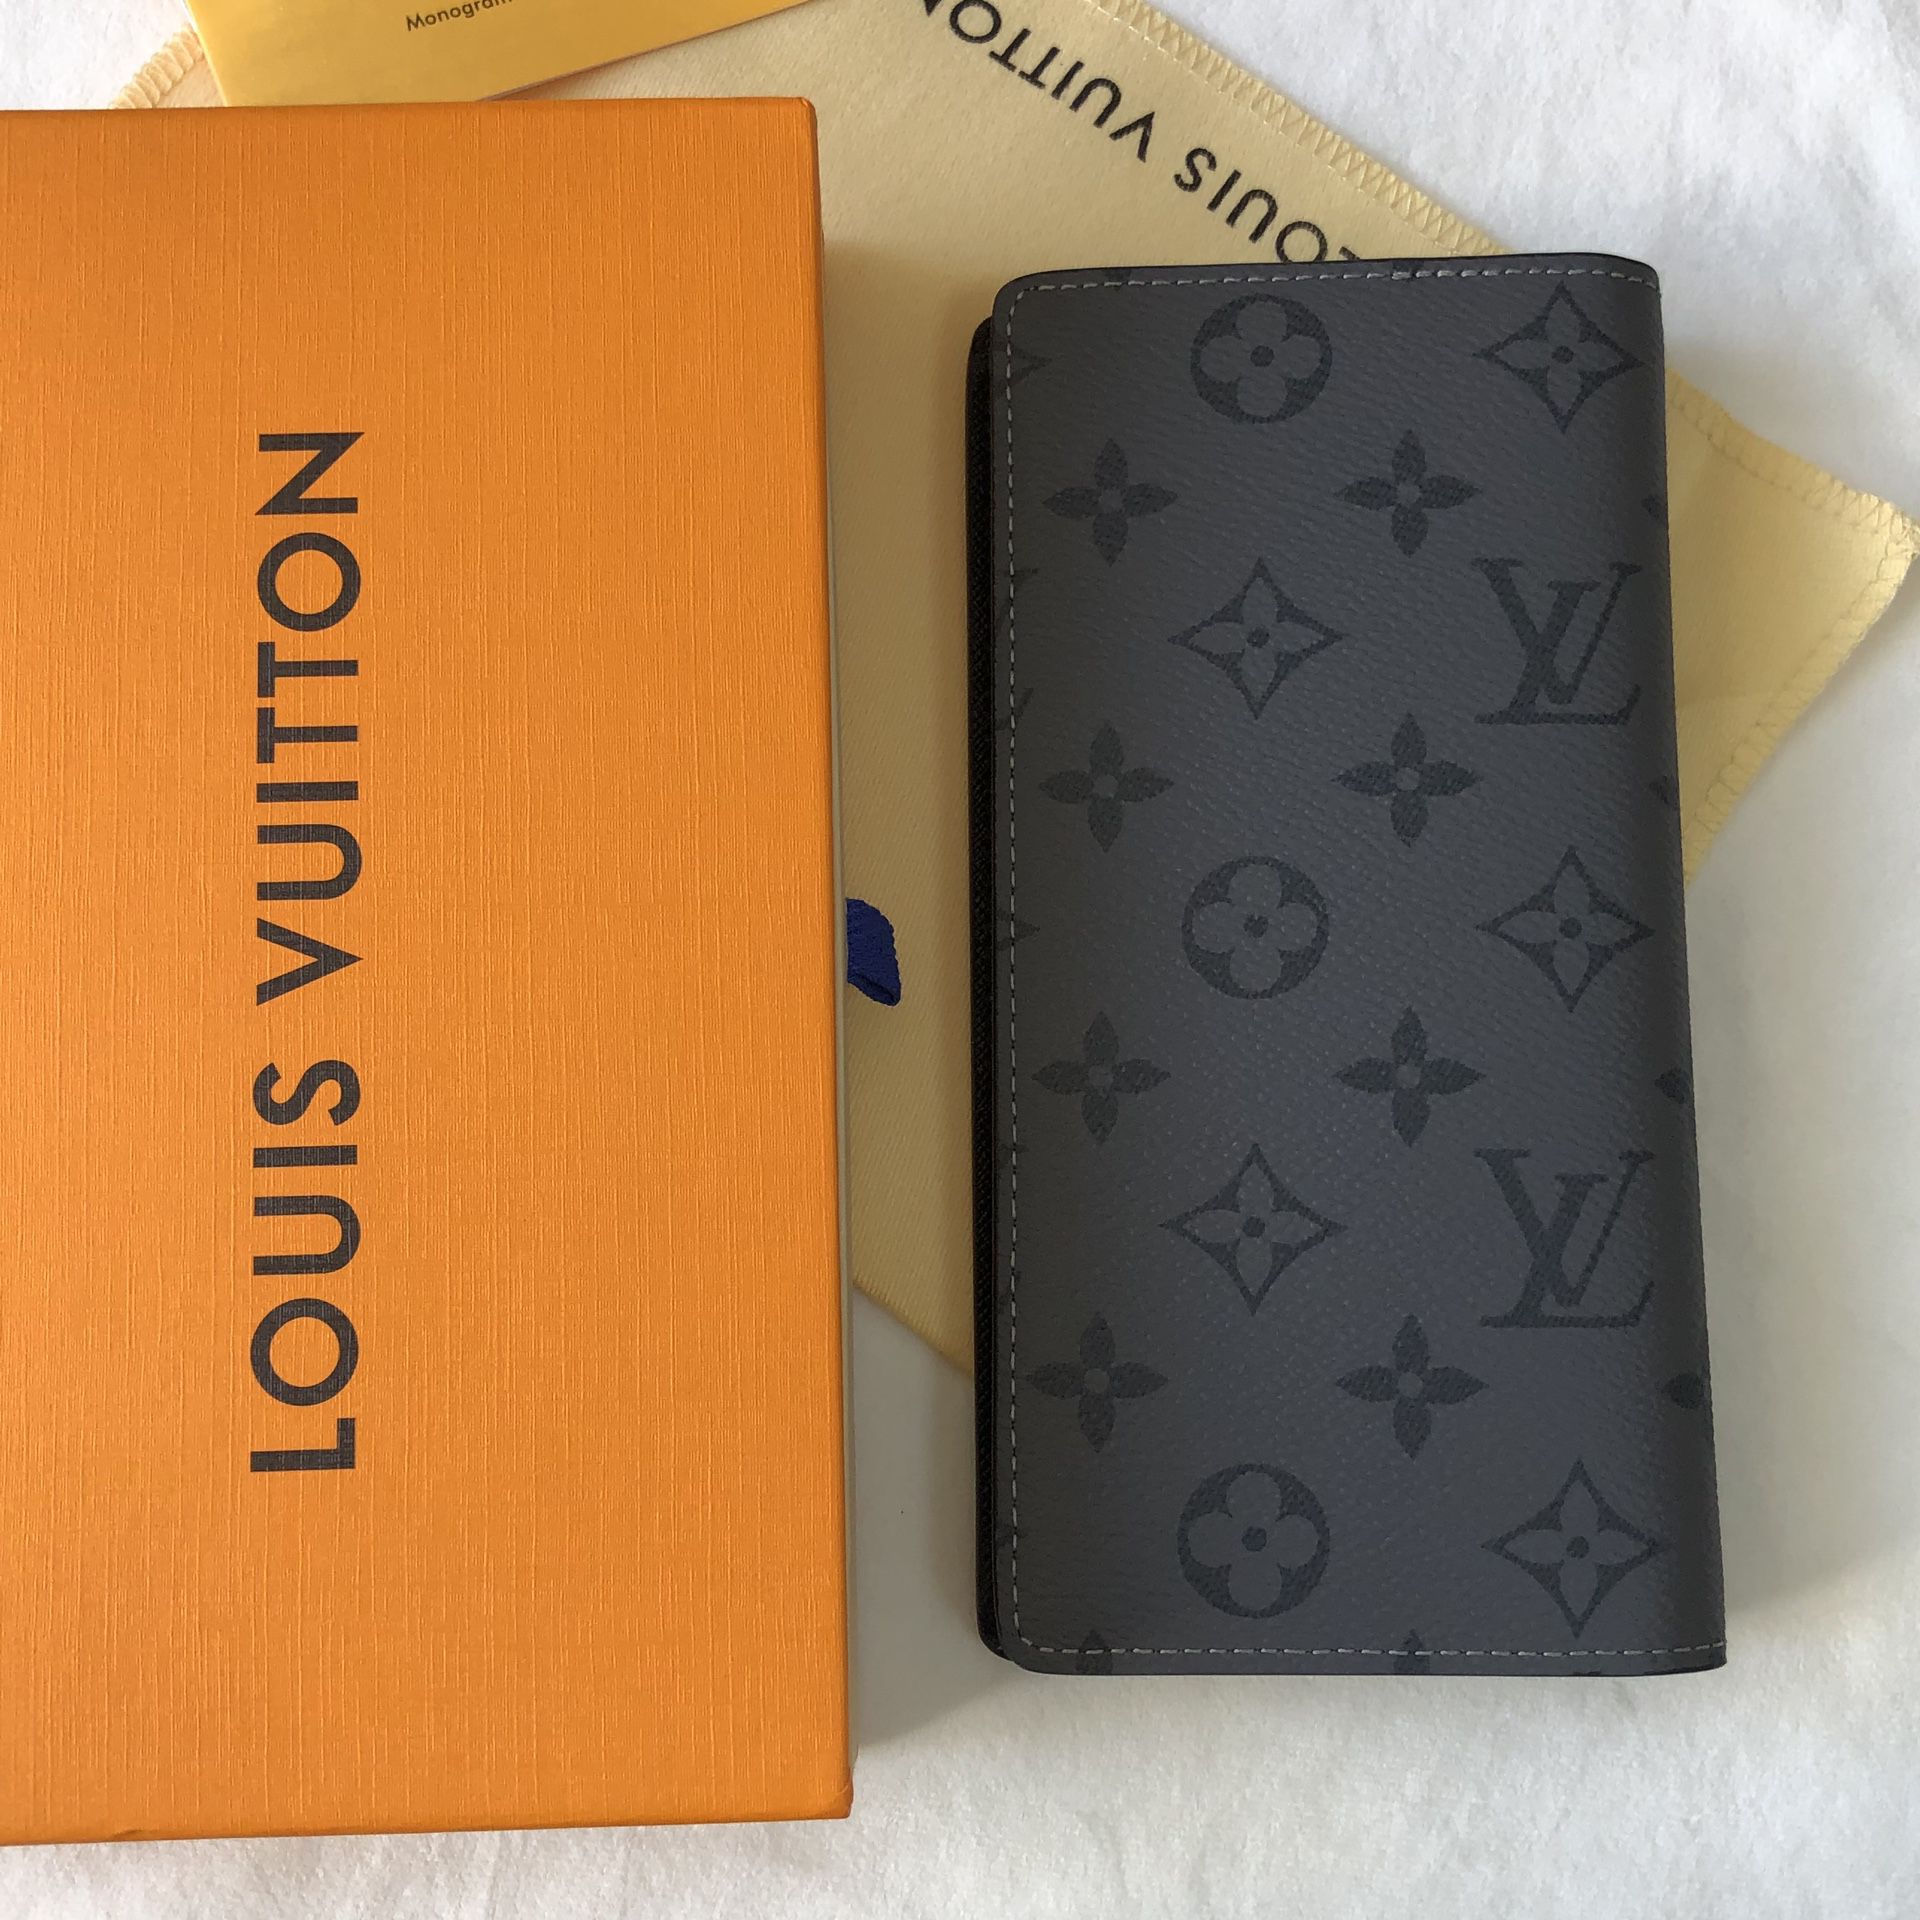 Louis Vuitton Double Cardholder Wallet - Monogram Eclipse Brand New for  Sale in Collinsville, IL - OfferUp